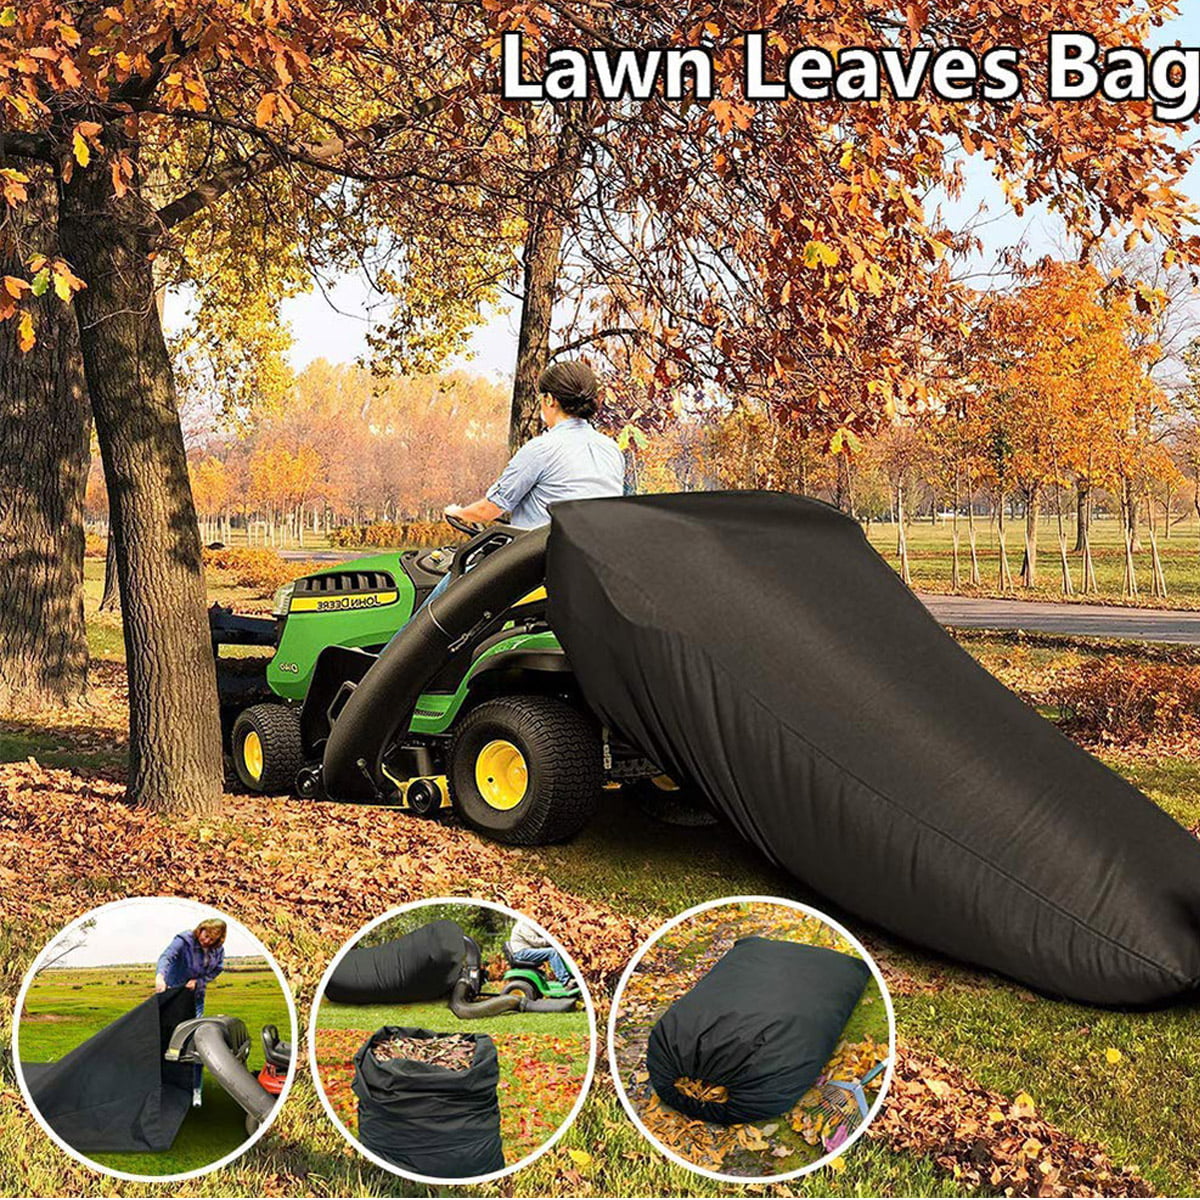 Standard 54 cu. ft., 120 Inch Opening Brown ST95000 Lawn Tractors Leaves Bag Material Collection Systems Leaf Bag Leaf Bag Ride-on Lawnmowers Grass Bag Reusable Yard Waste Bag for Garden Lawn,